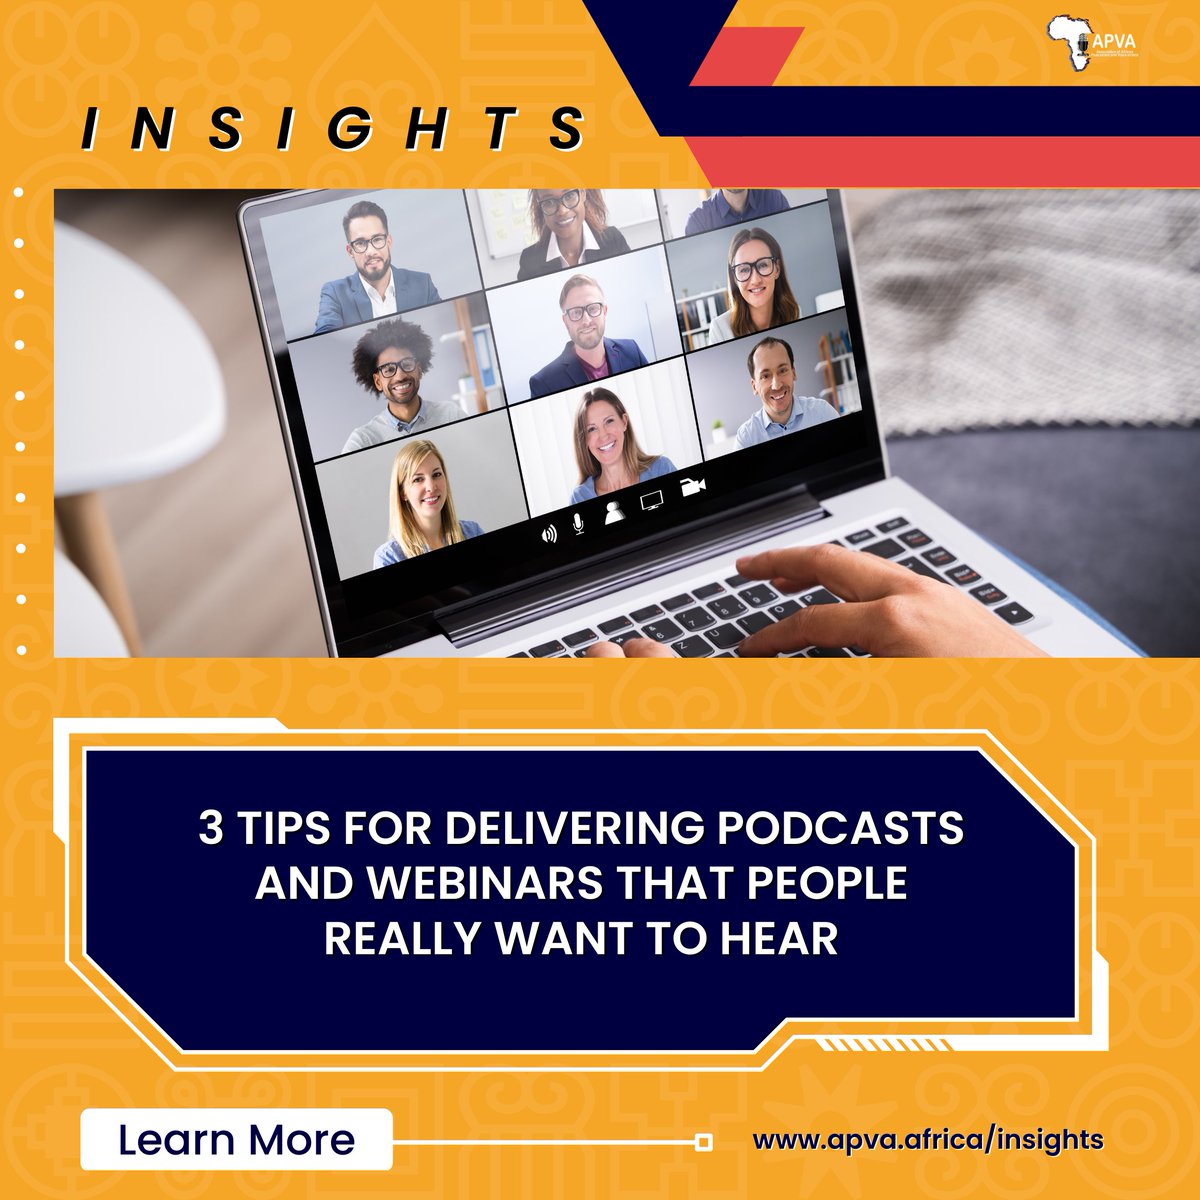 Whether you're a guest (or host) on a podcast, webinar, or virtual training session, check out our website to learn about the three attributes that will make you a far more compelling speaker.
bit.ly/3JV2nRT
.
.
.
.
.

#apva #insights #theafricancreative